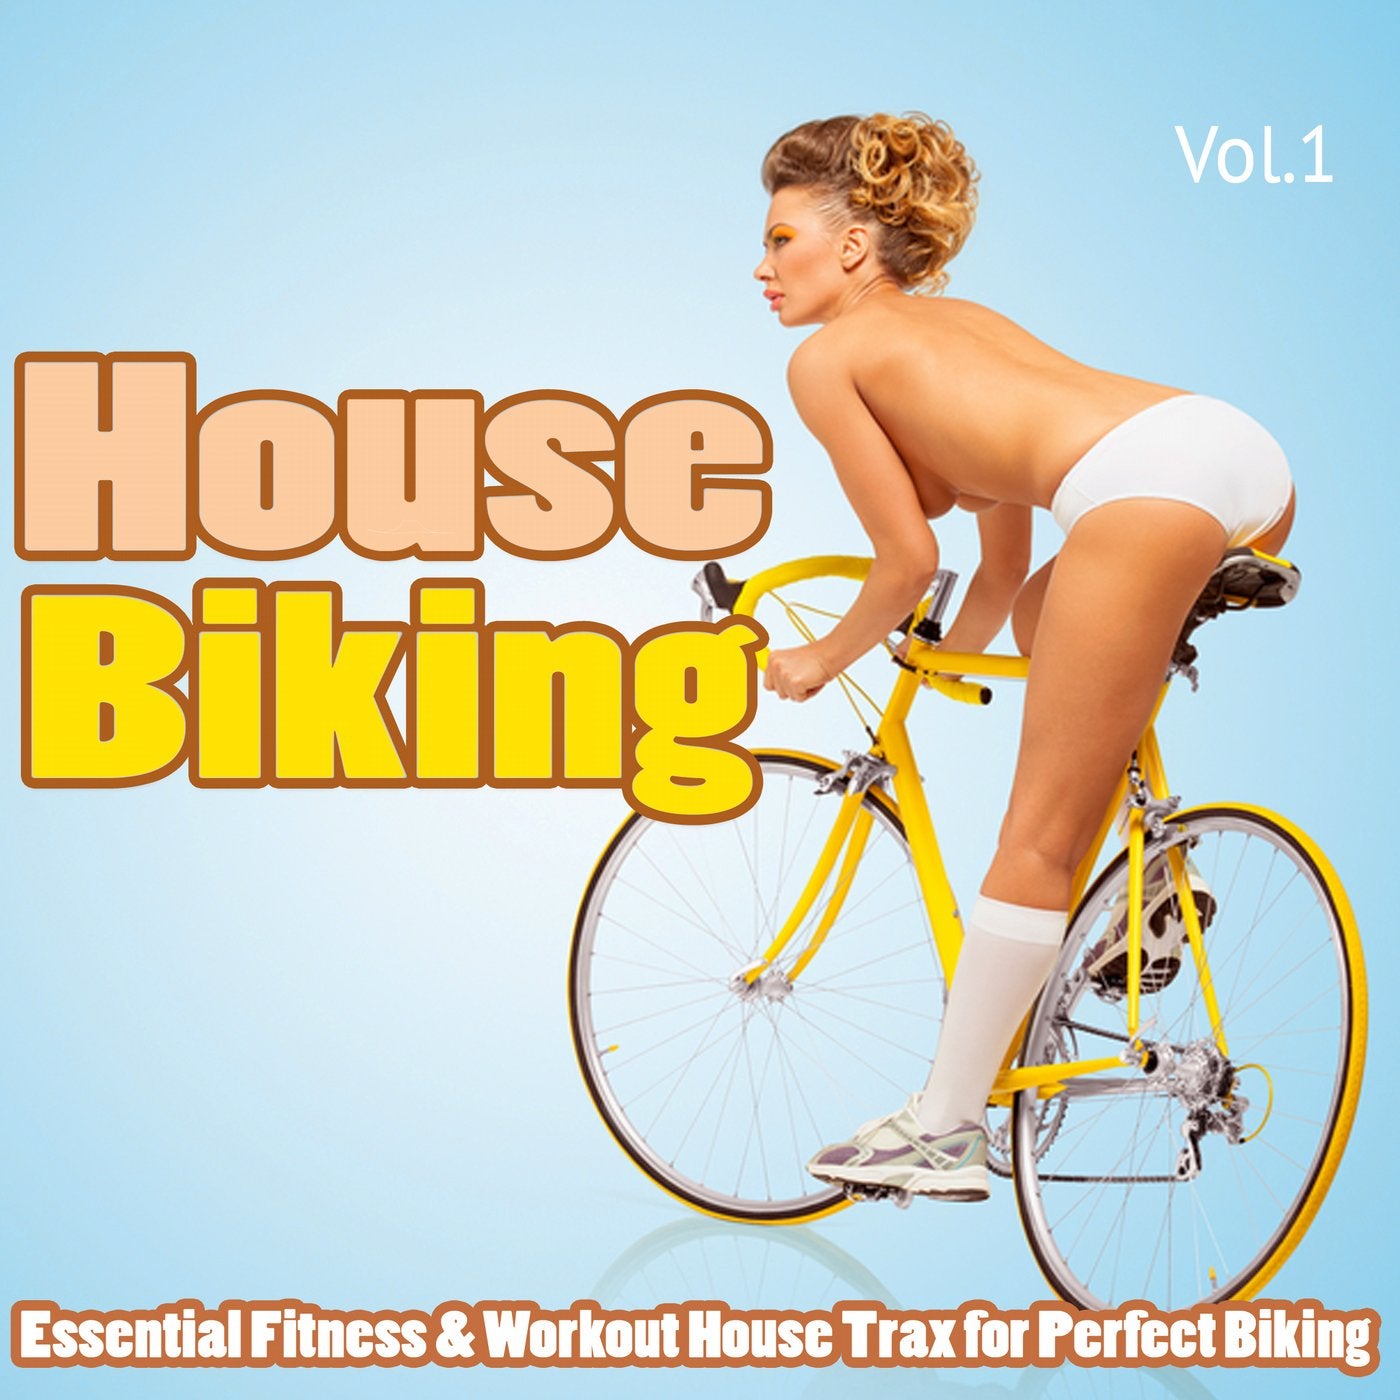 House Biking, Vol. 1 - Essential Fitness & Workout House Trax for Perfect Biking